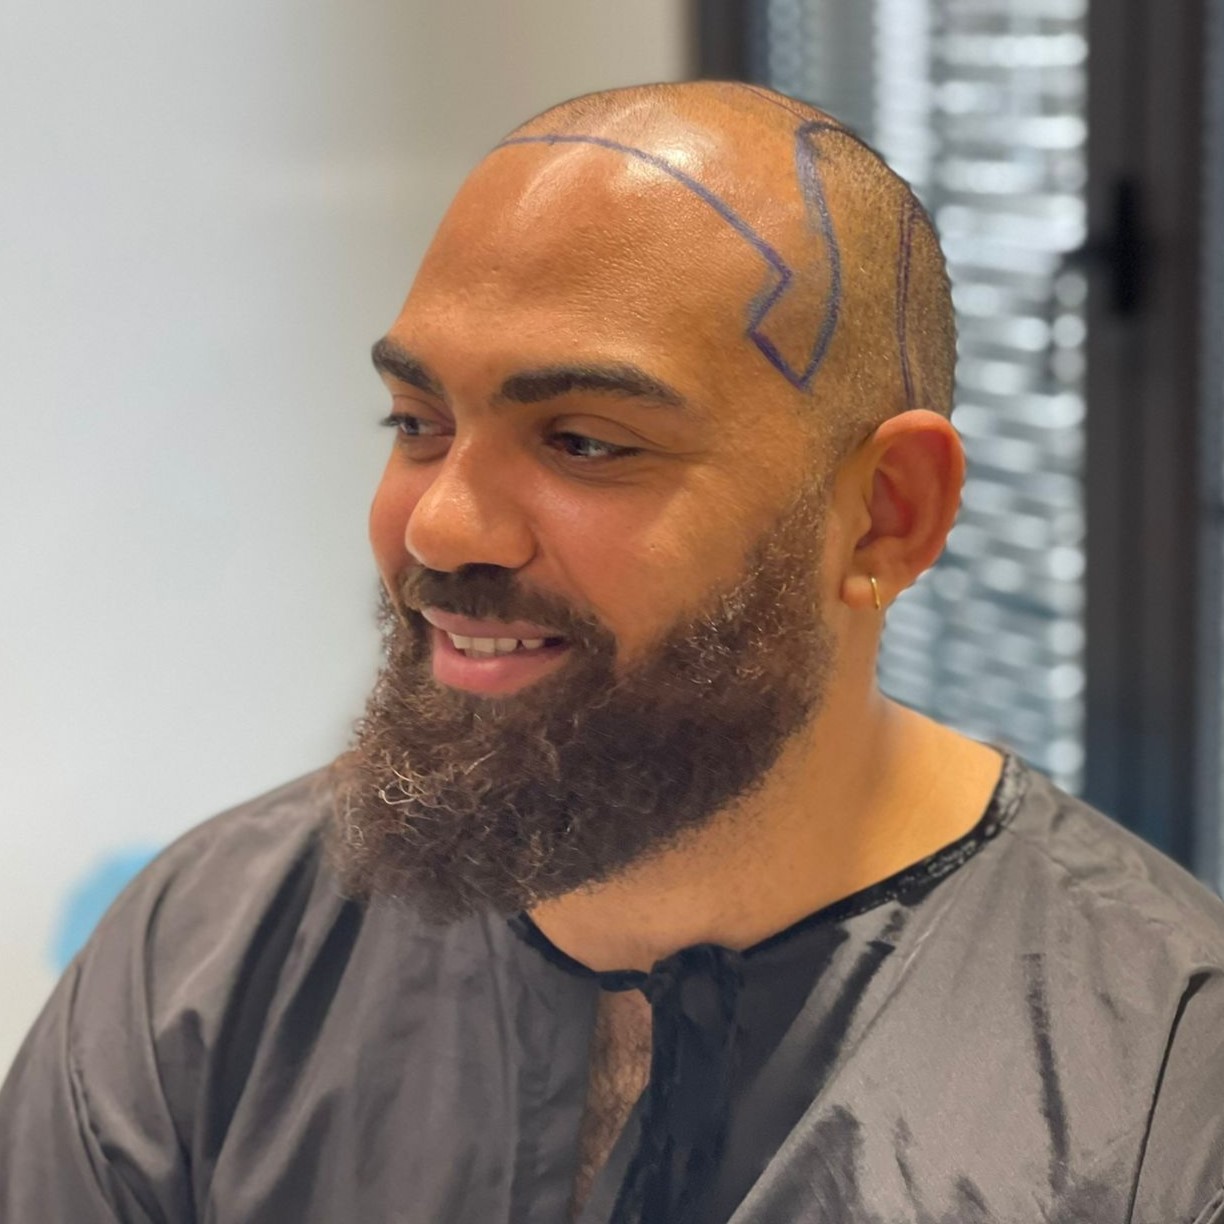 Hair Transplant vs Shaved Head - What Makes You Look Your Best?